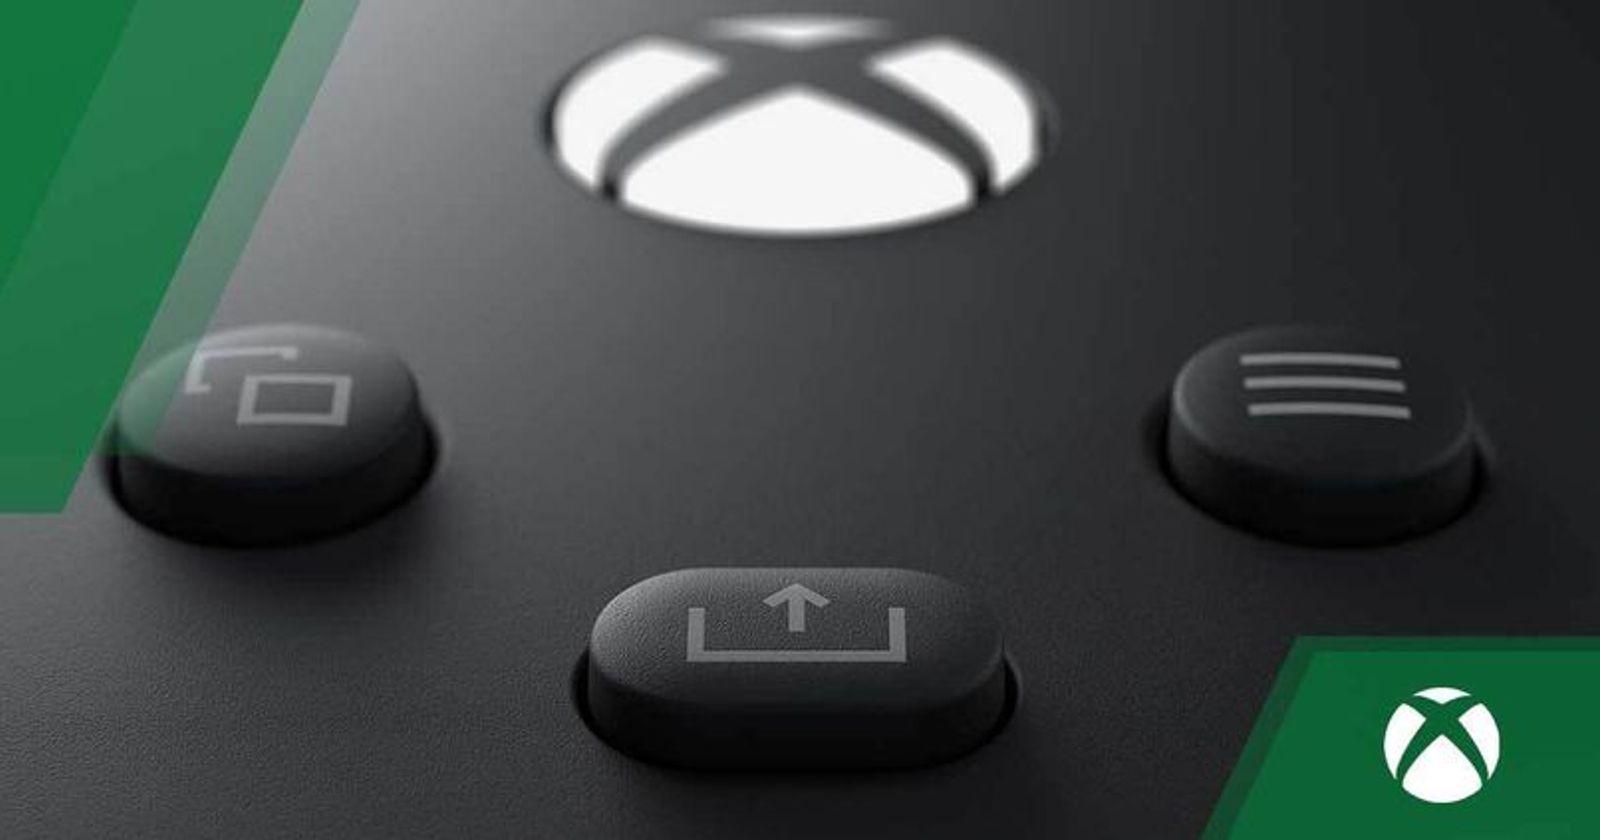 How To Change Your Xbox Series XS And Xbox One Gamertag - GameSpot